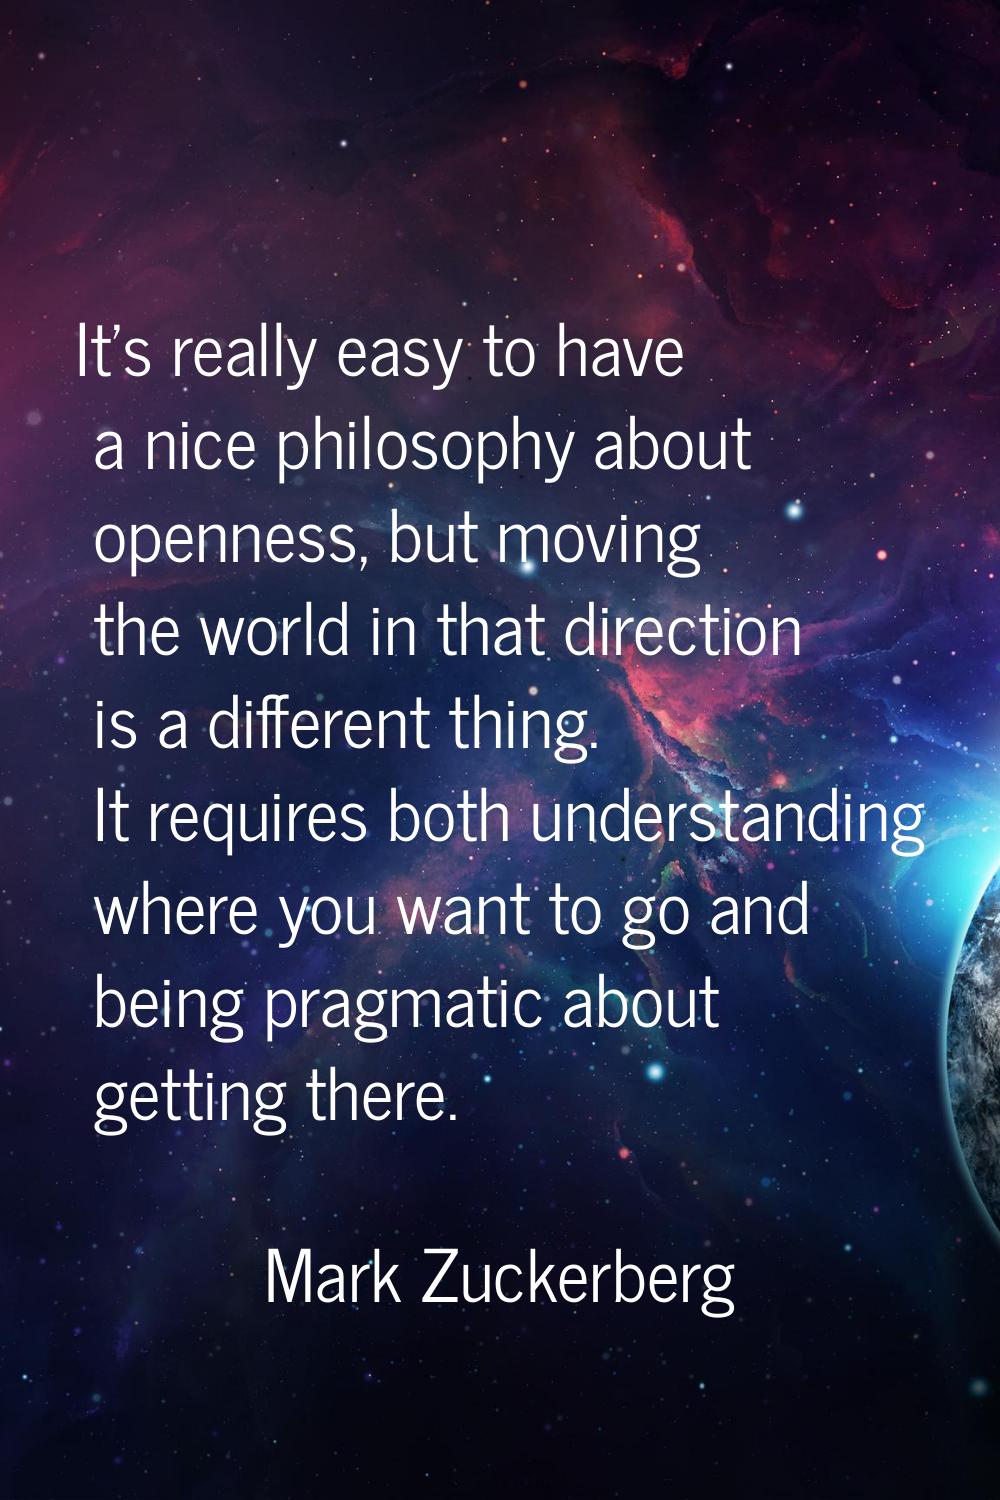 It's really easy to have a nice philosophy about openness, but moving the world in that direction i